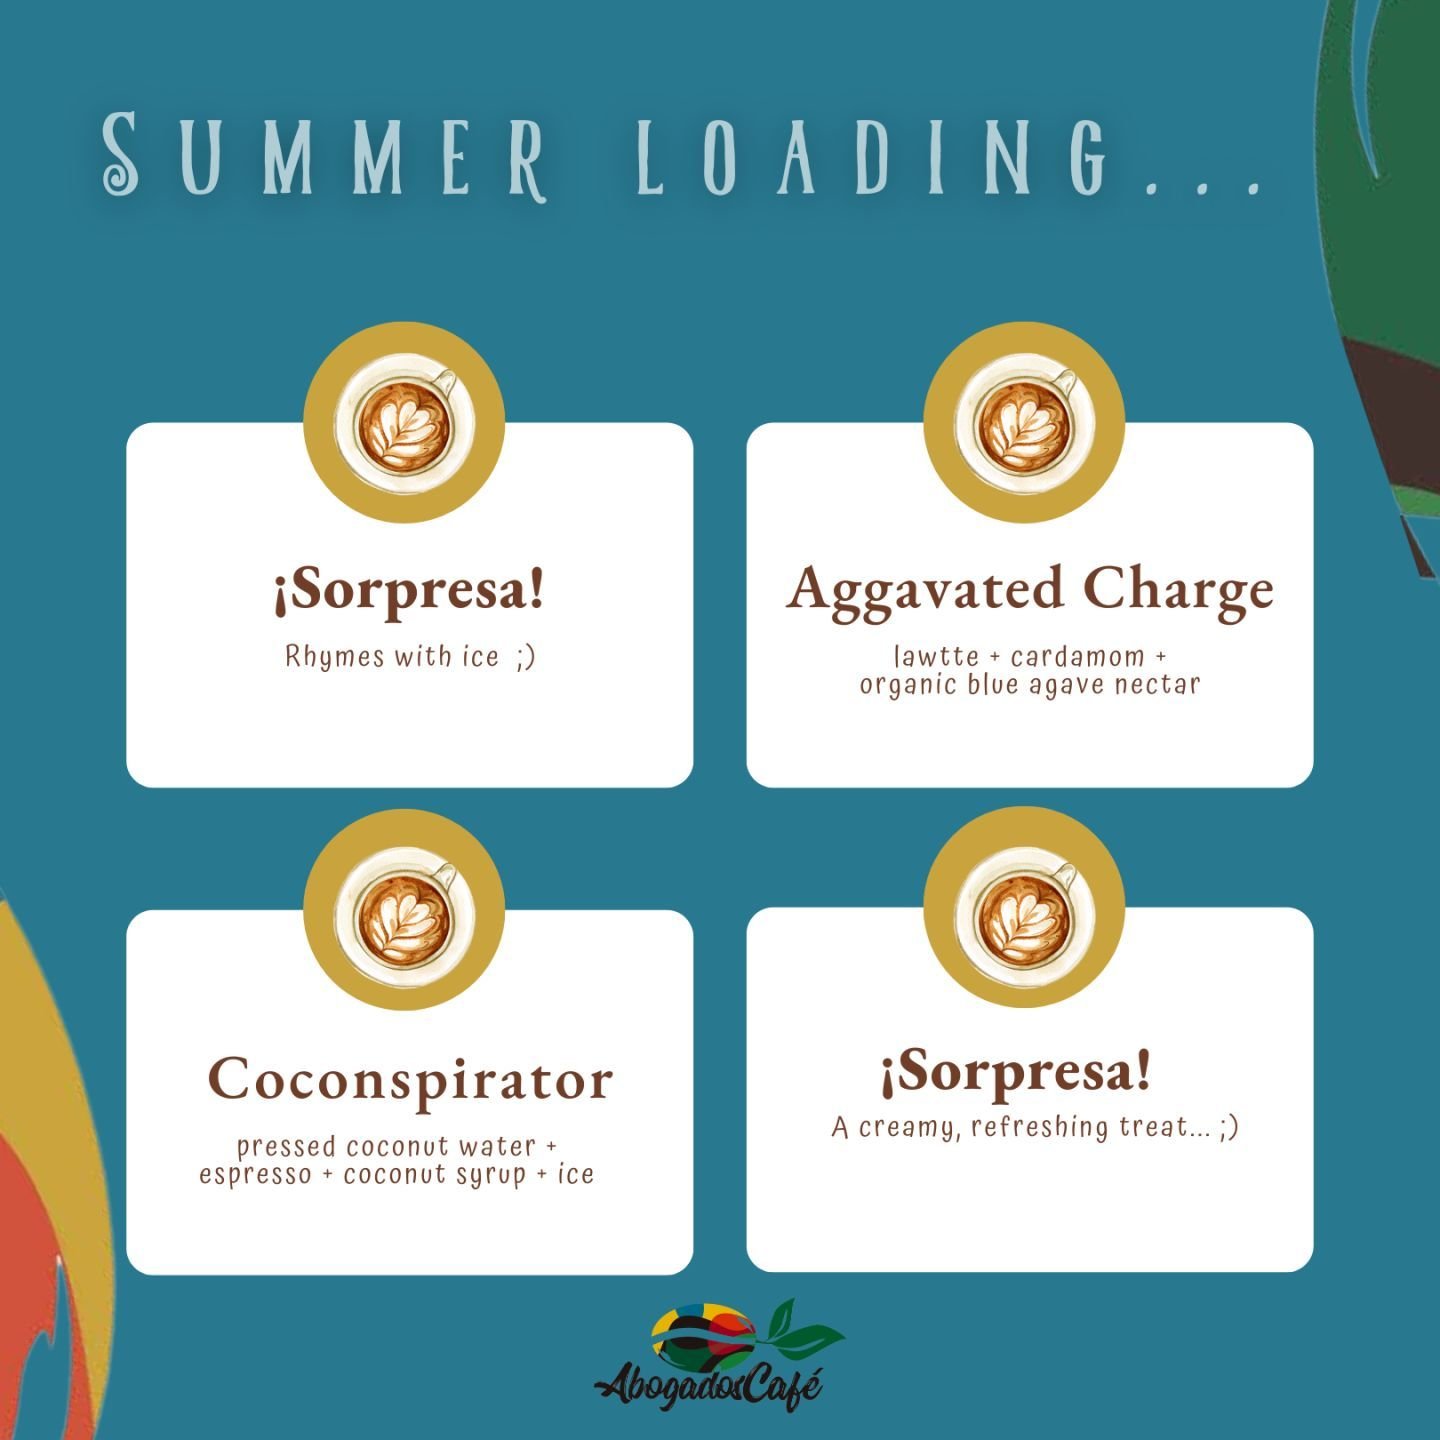 Stay tuned for our first batch of summer drinks! ☀️🏖️ 🌴